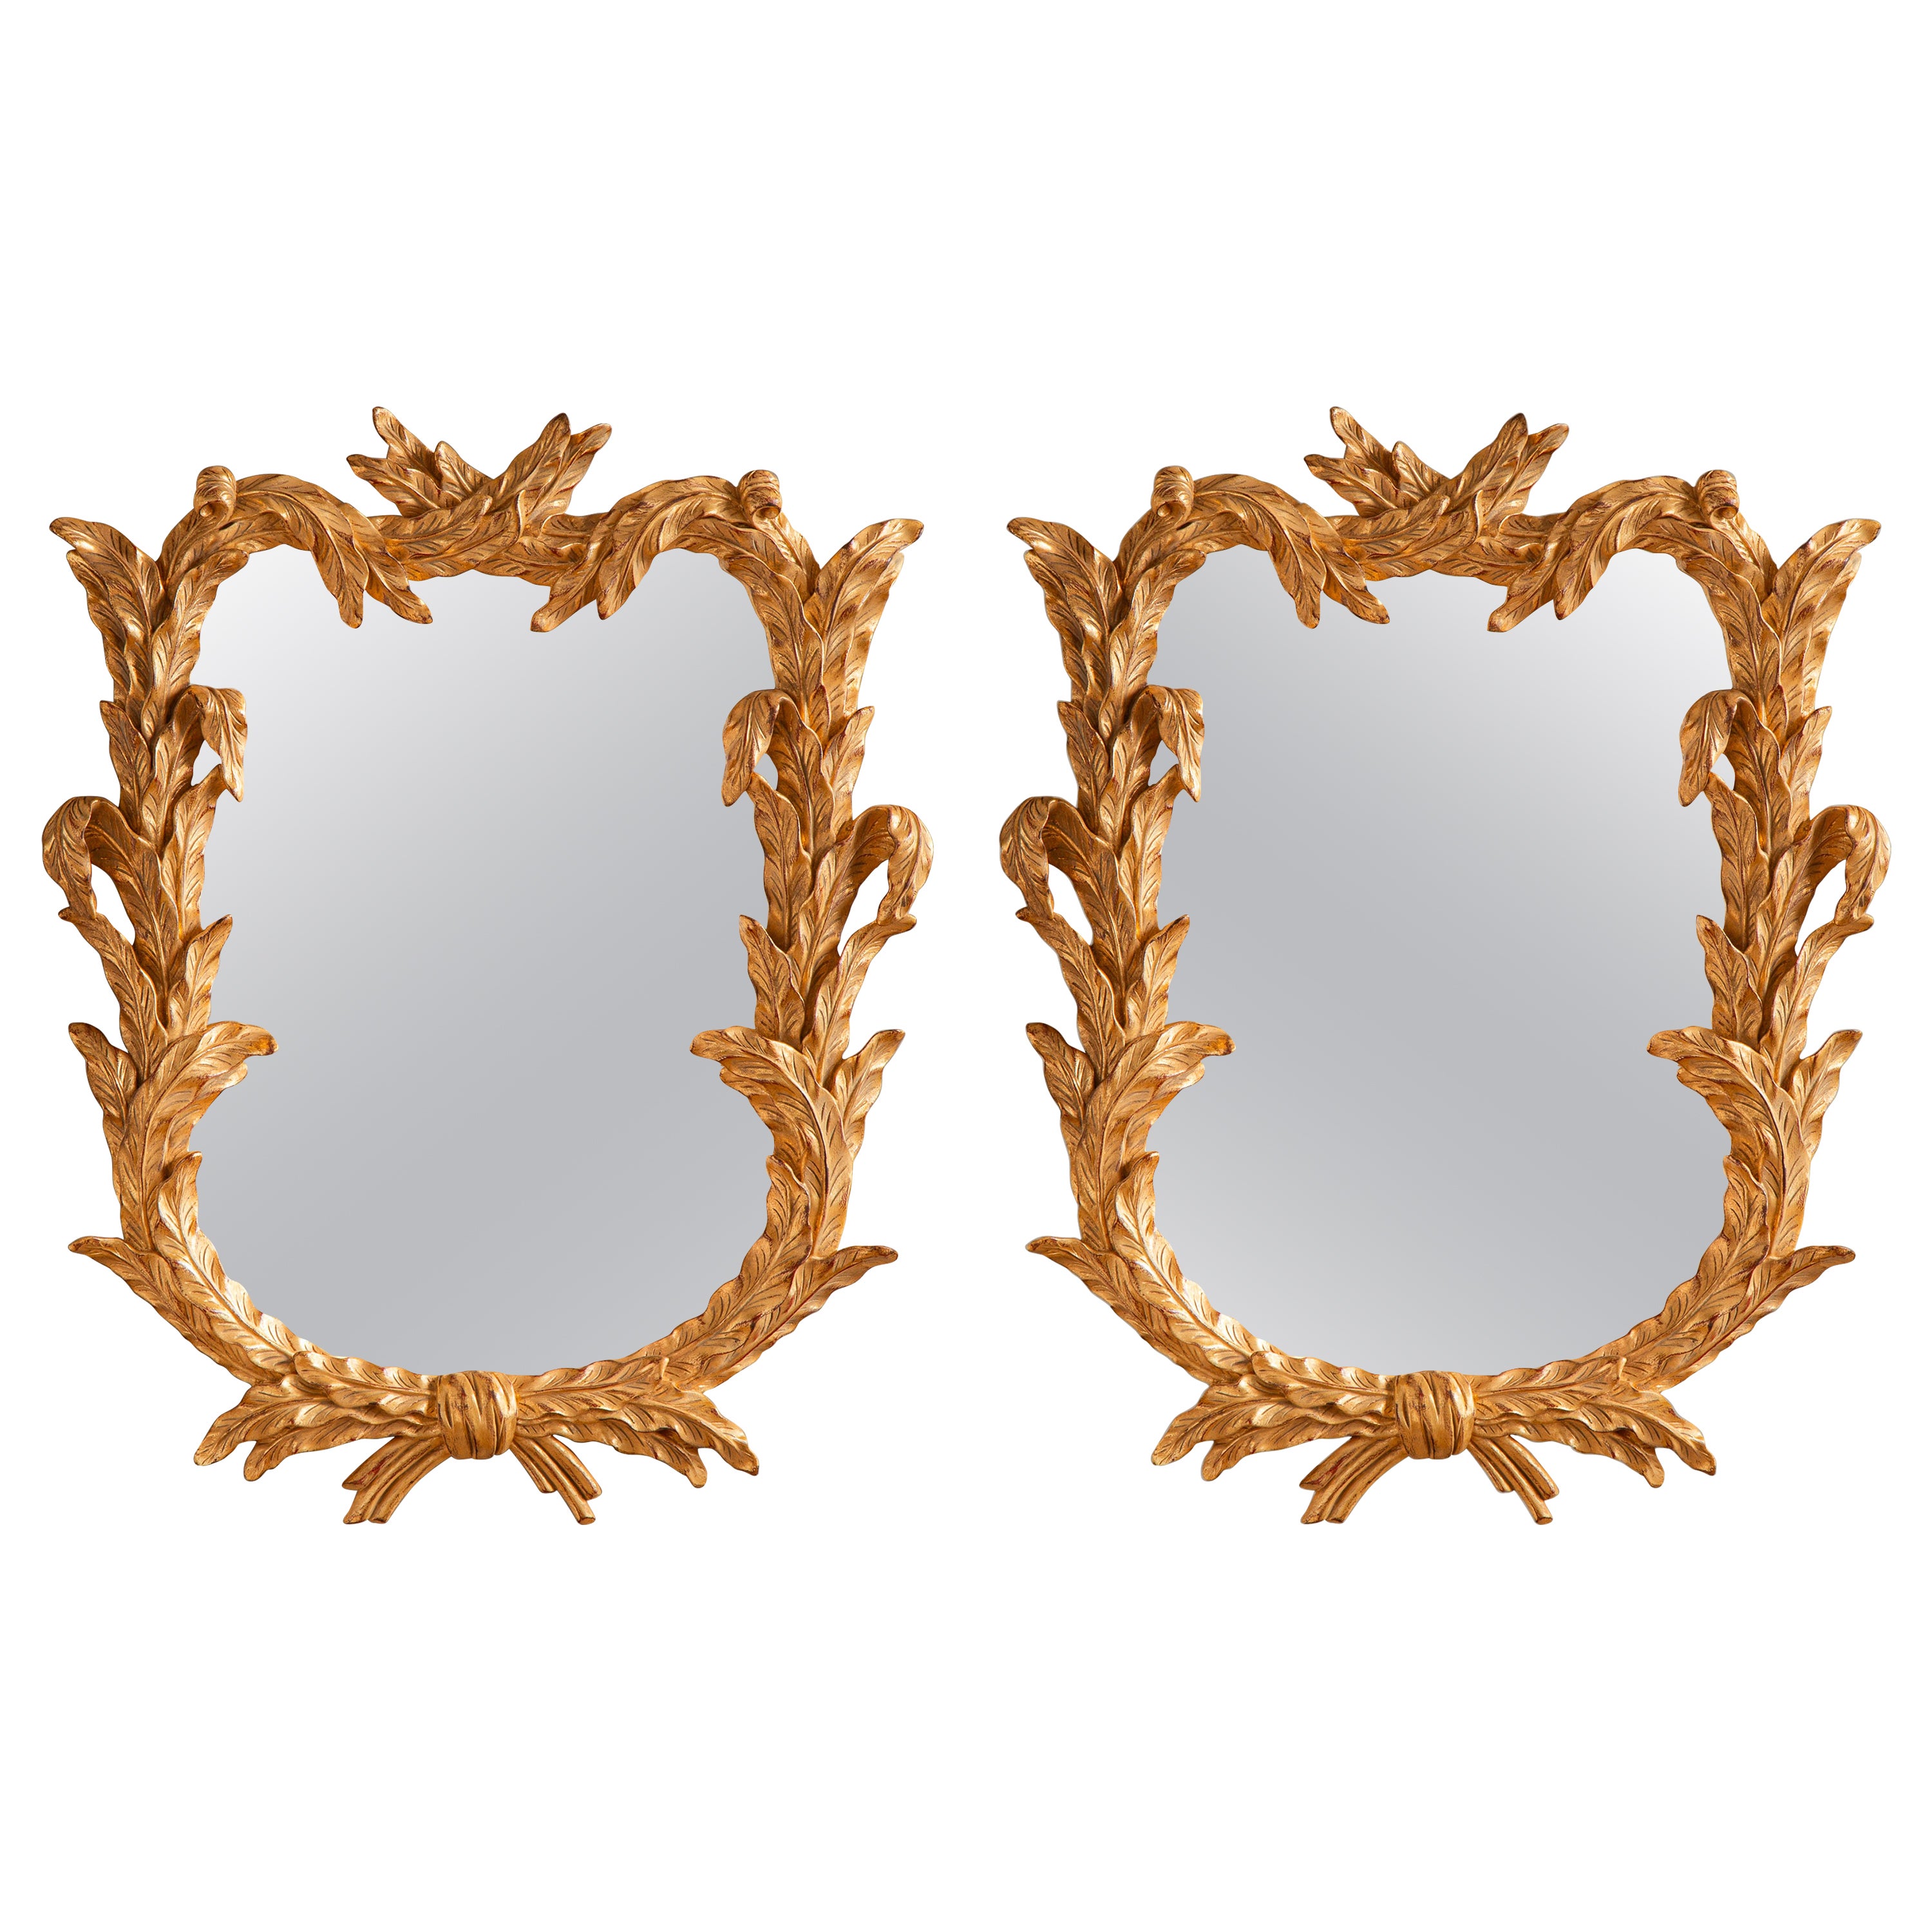 Pair of Giltwood George the third Style Mirror Made by La Maison London